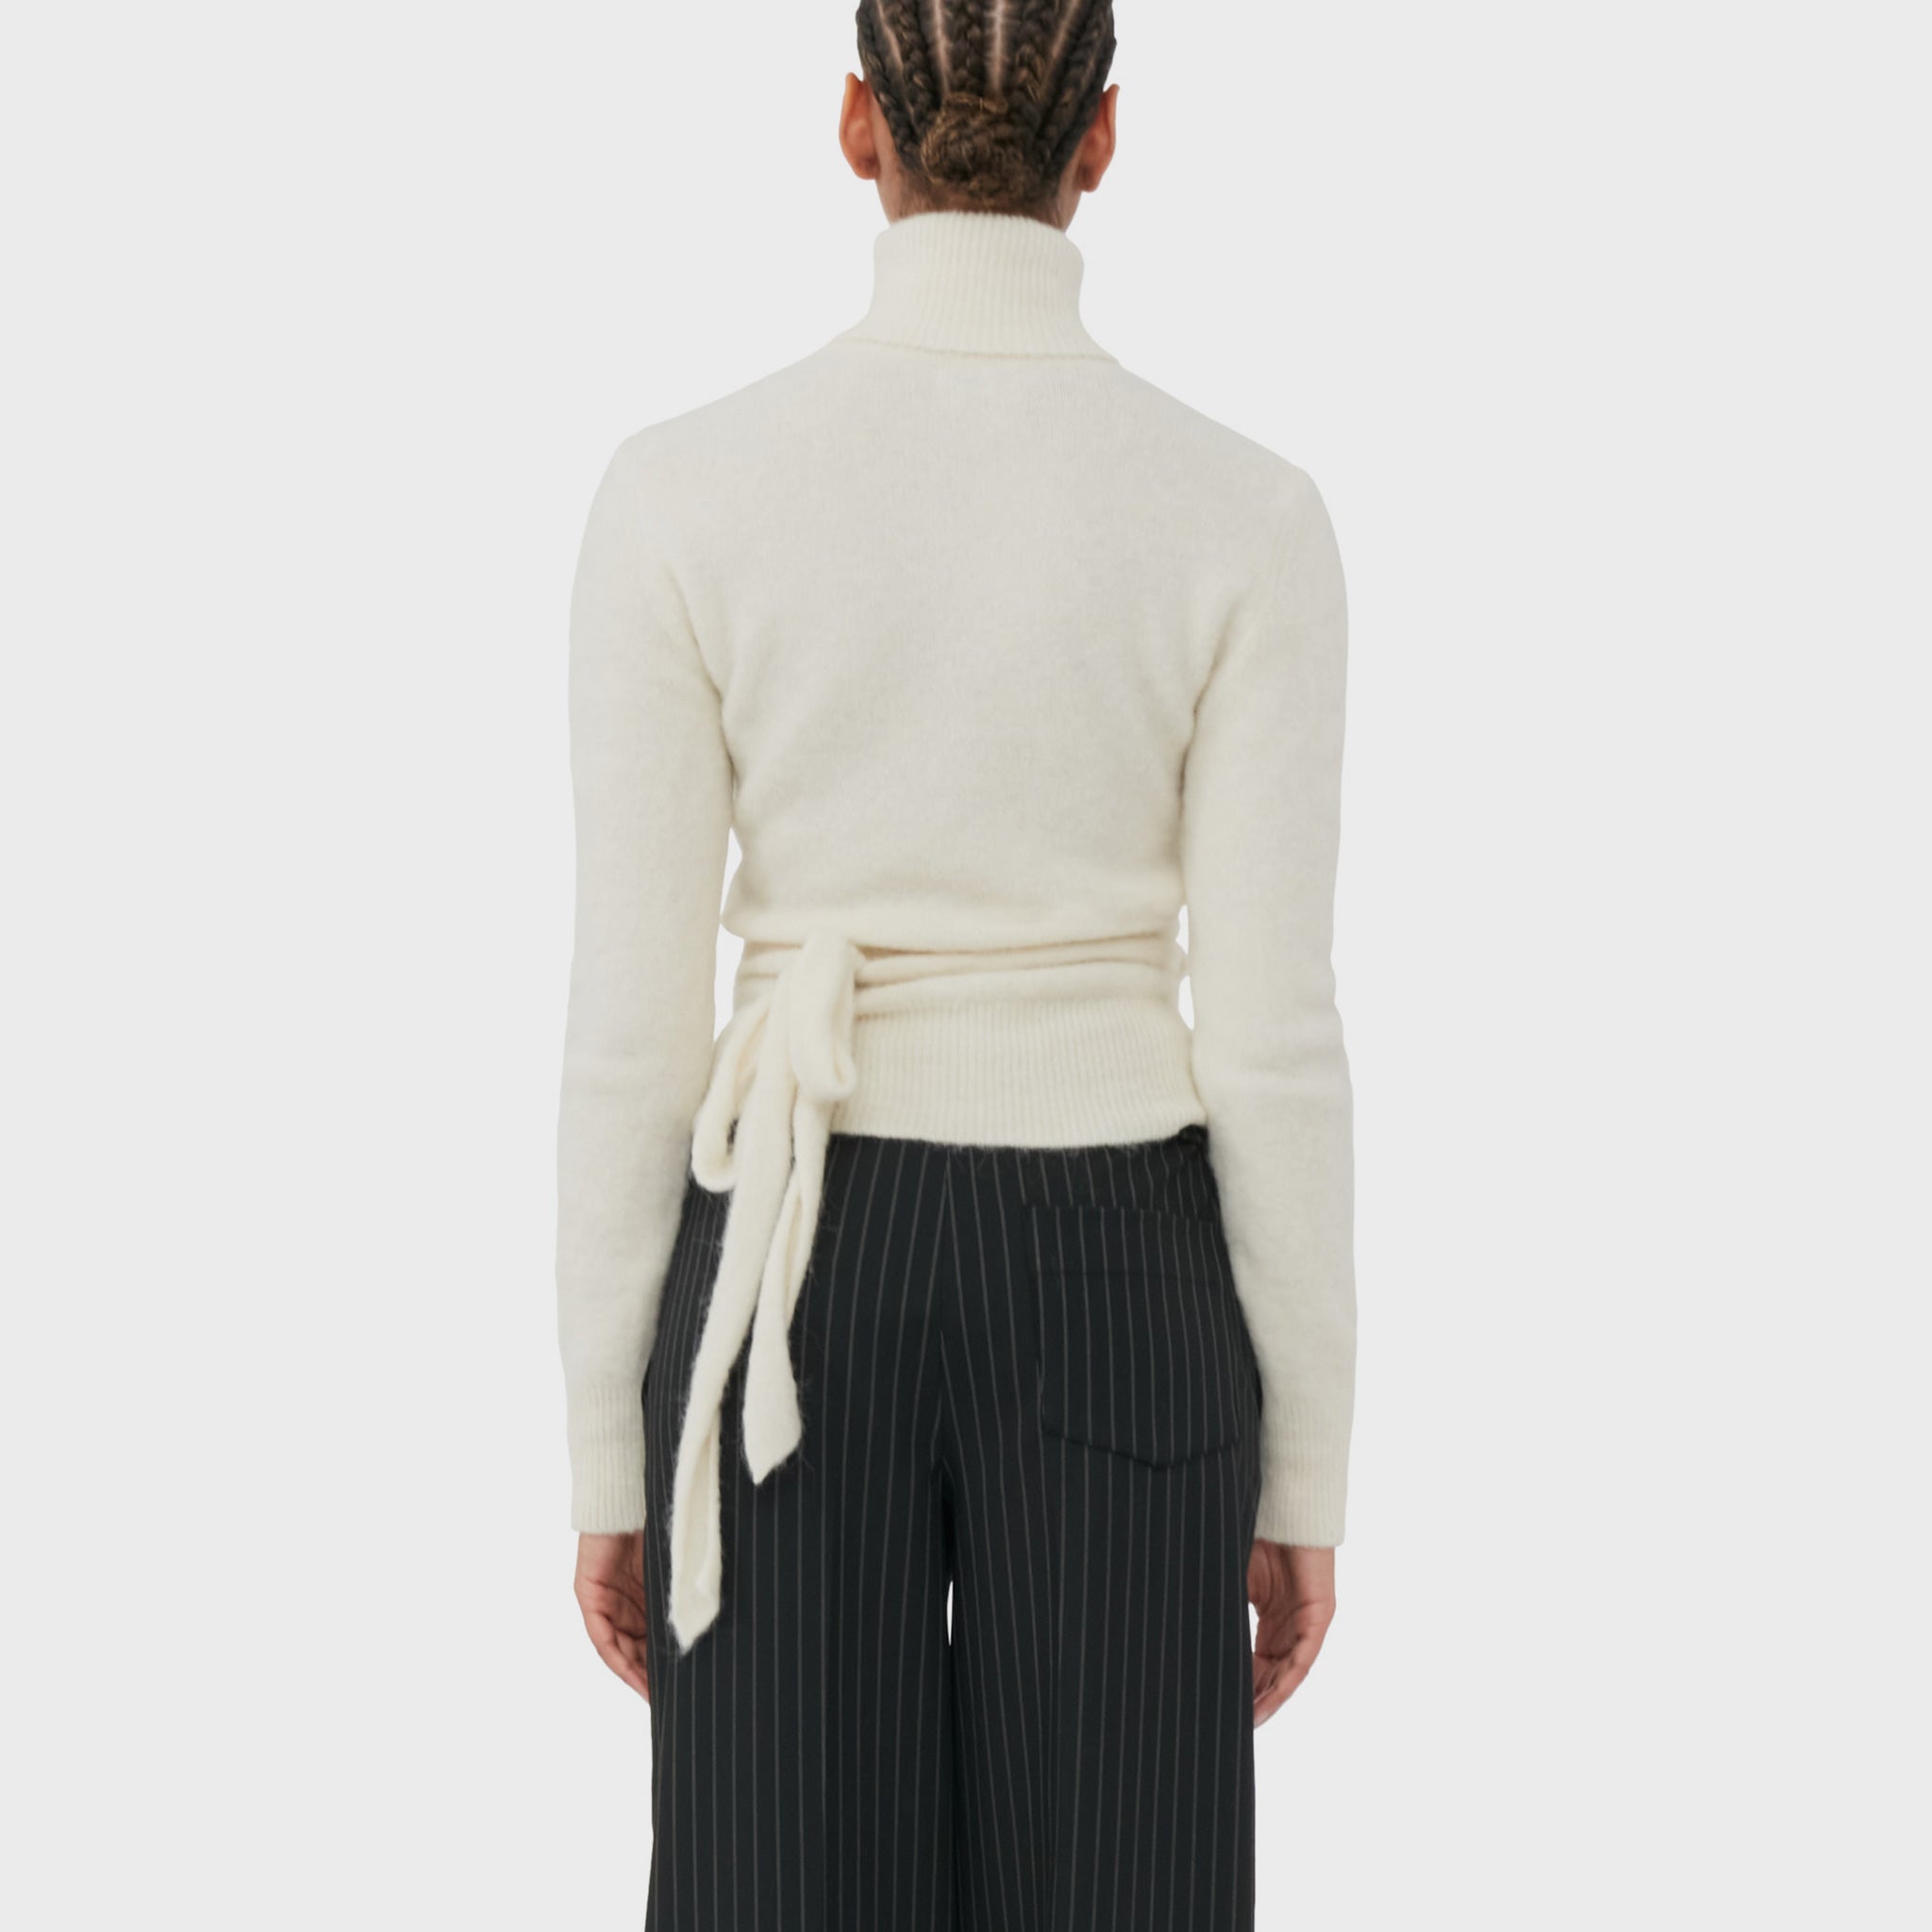 A model wears the soft wrapped white turtleneck sweater with cutout details from GANNI - back view showing waist tie.